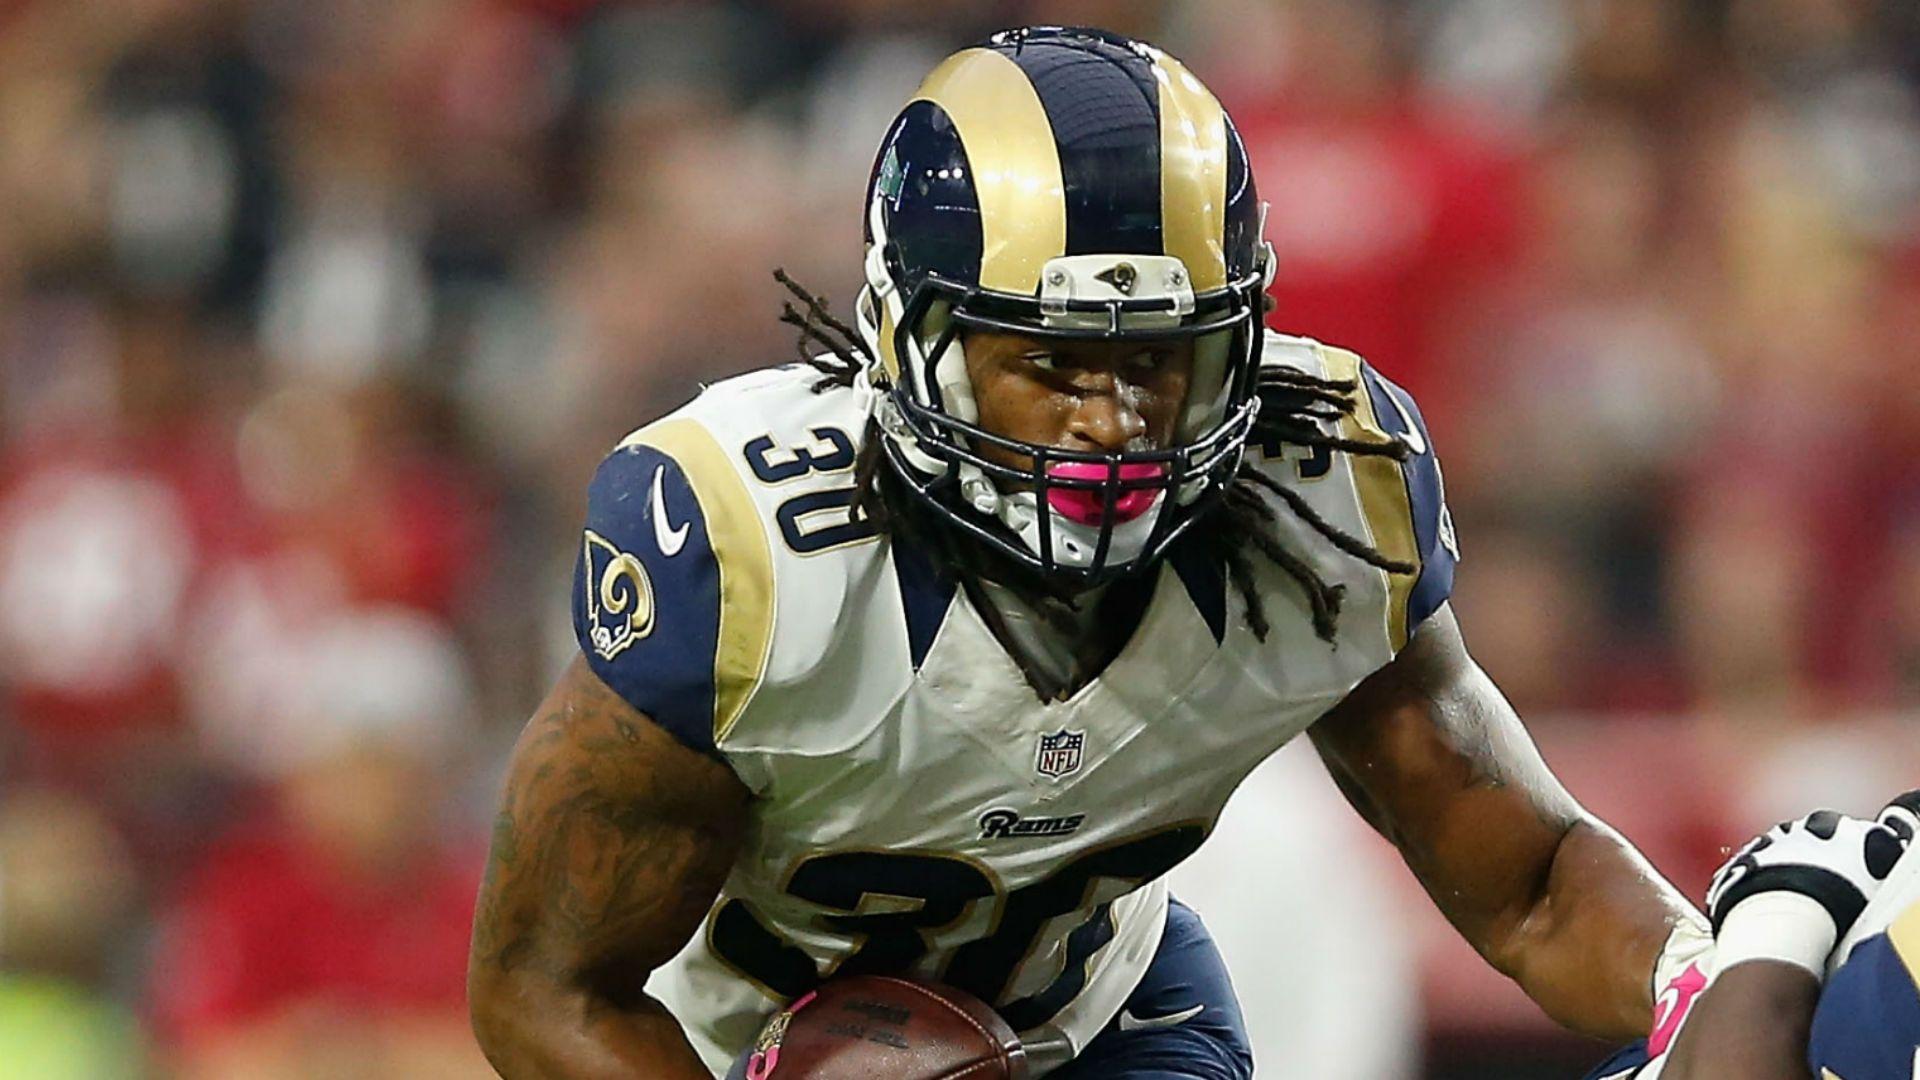 Rams RB Todd Gurley is spending the offseason breaking ankles